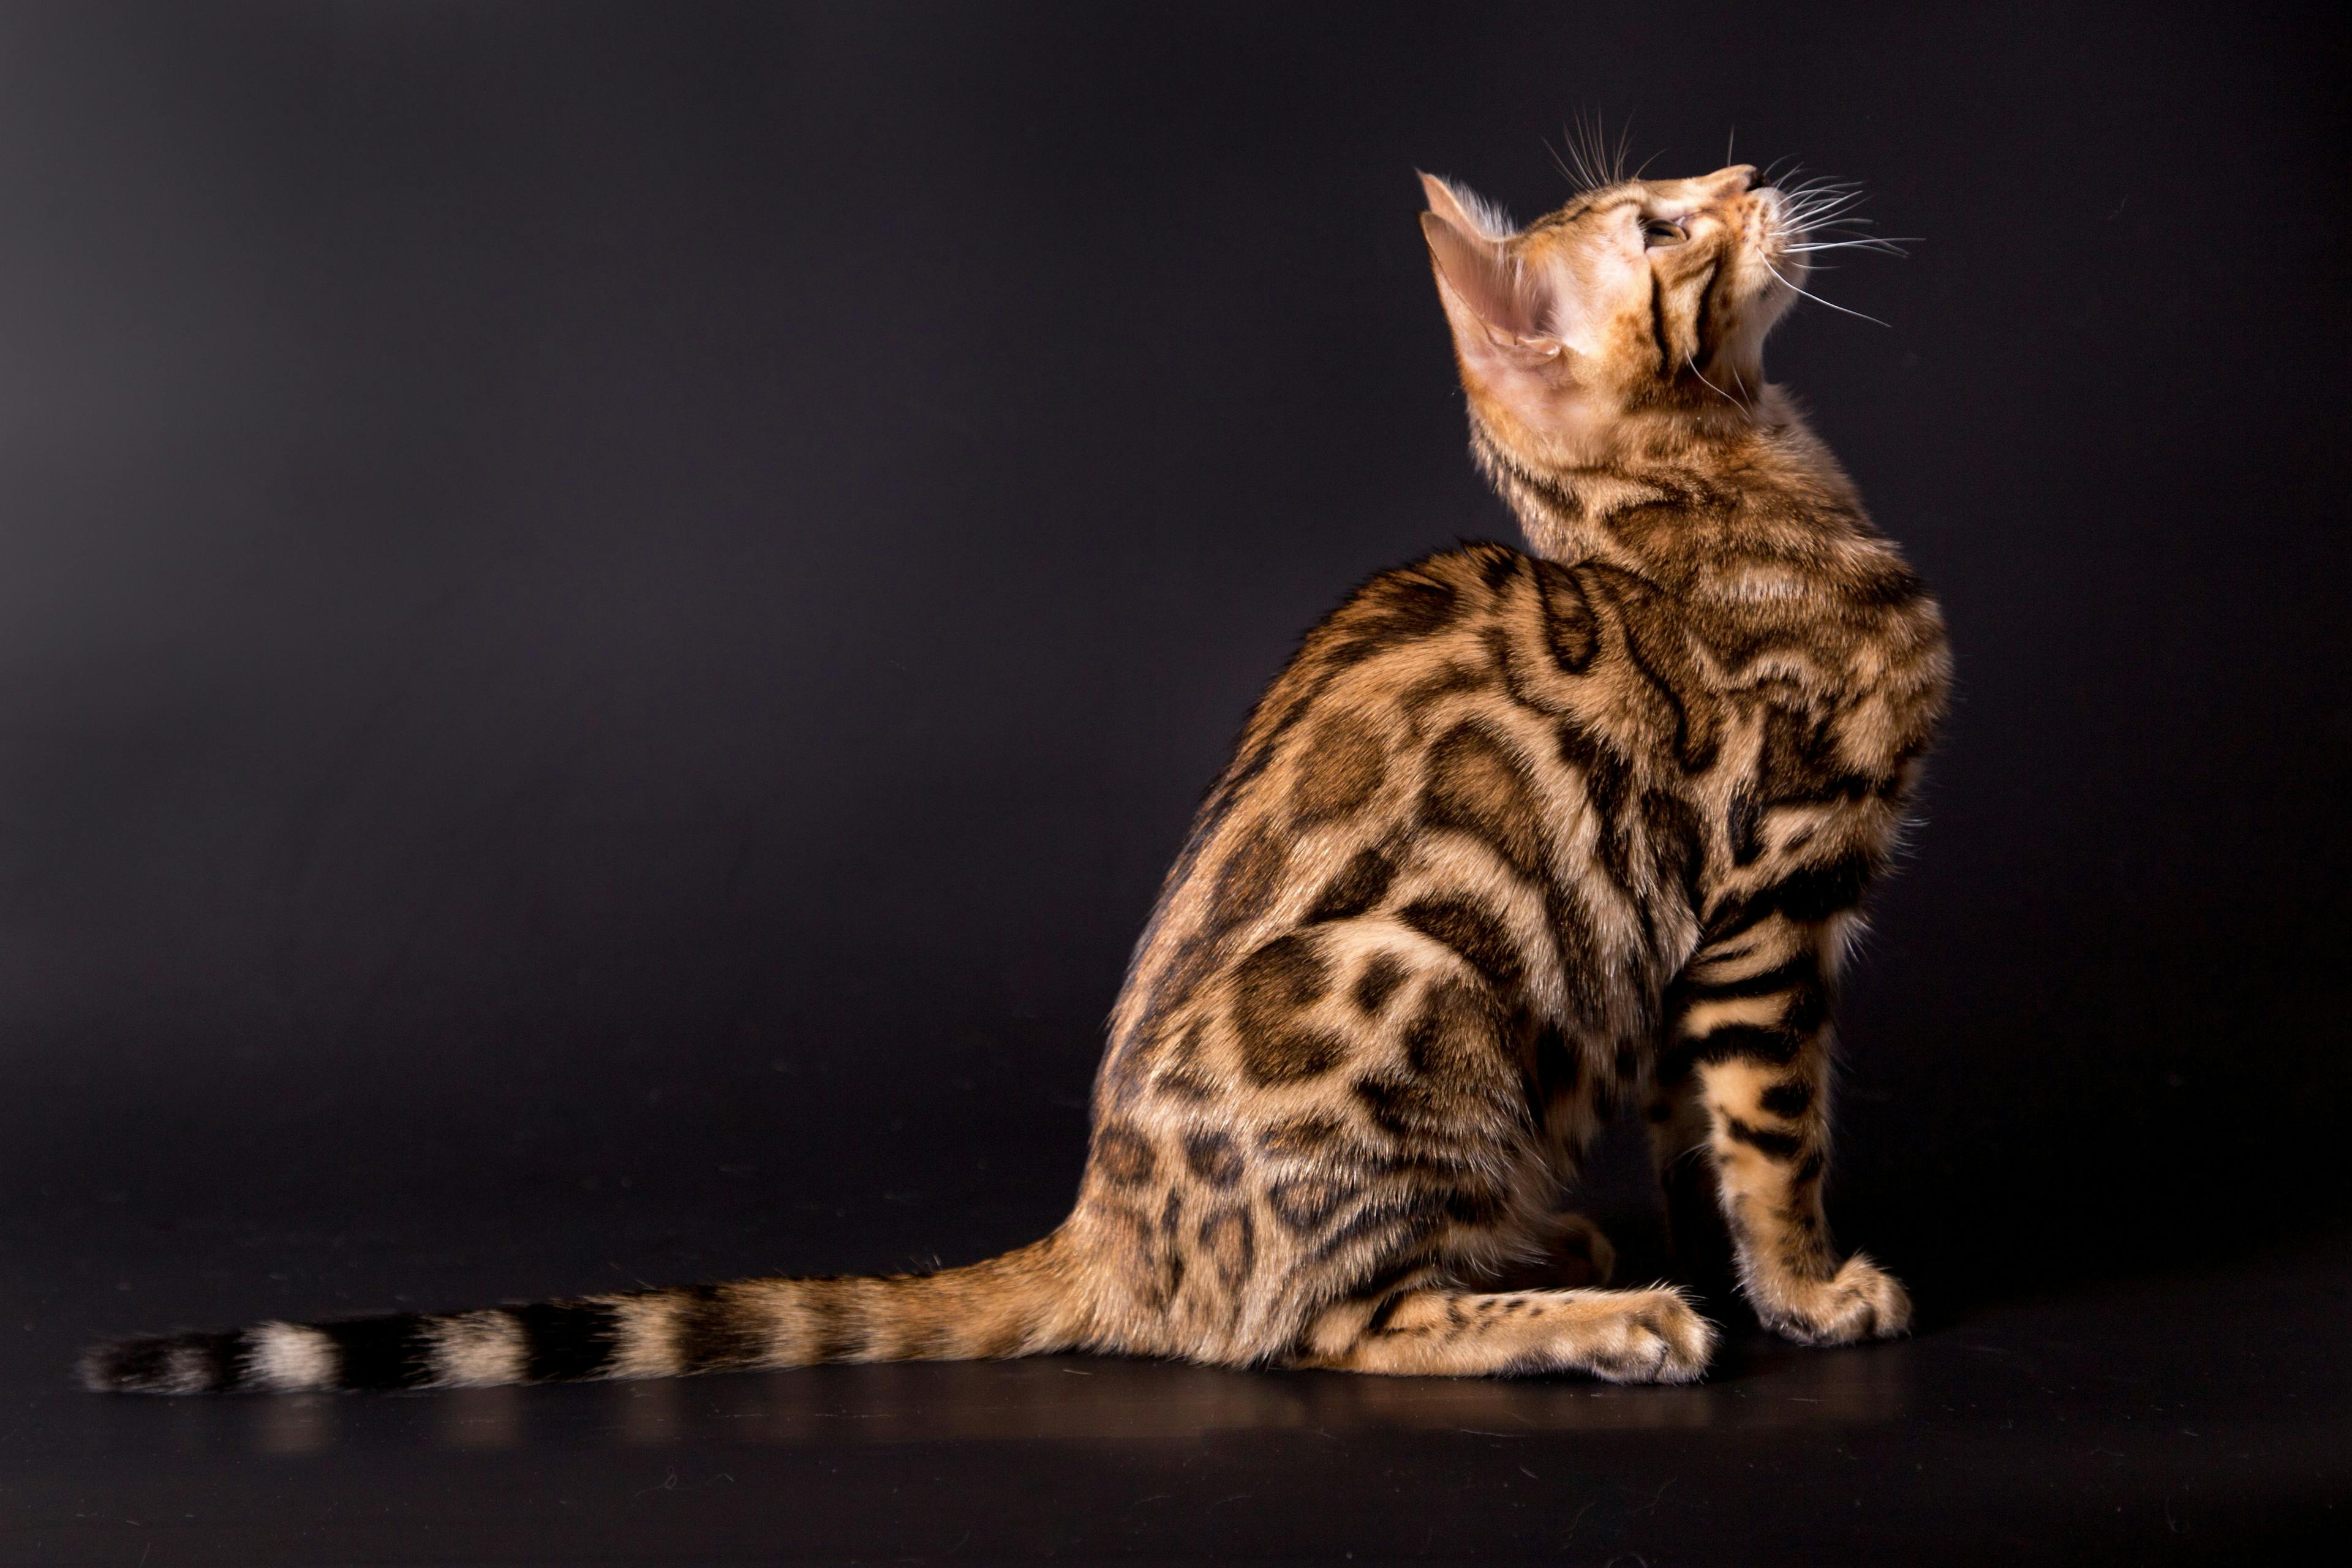 Bengals: Are these "wild" cats suitable pets?